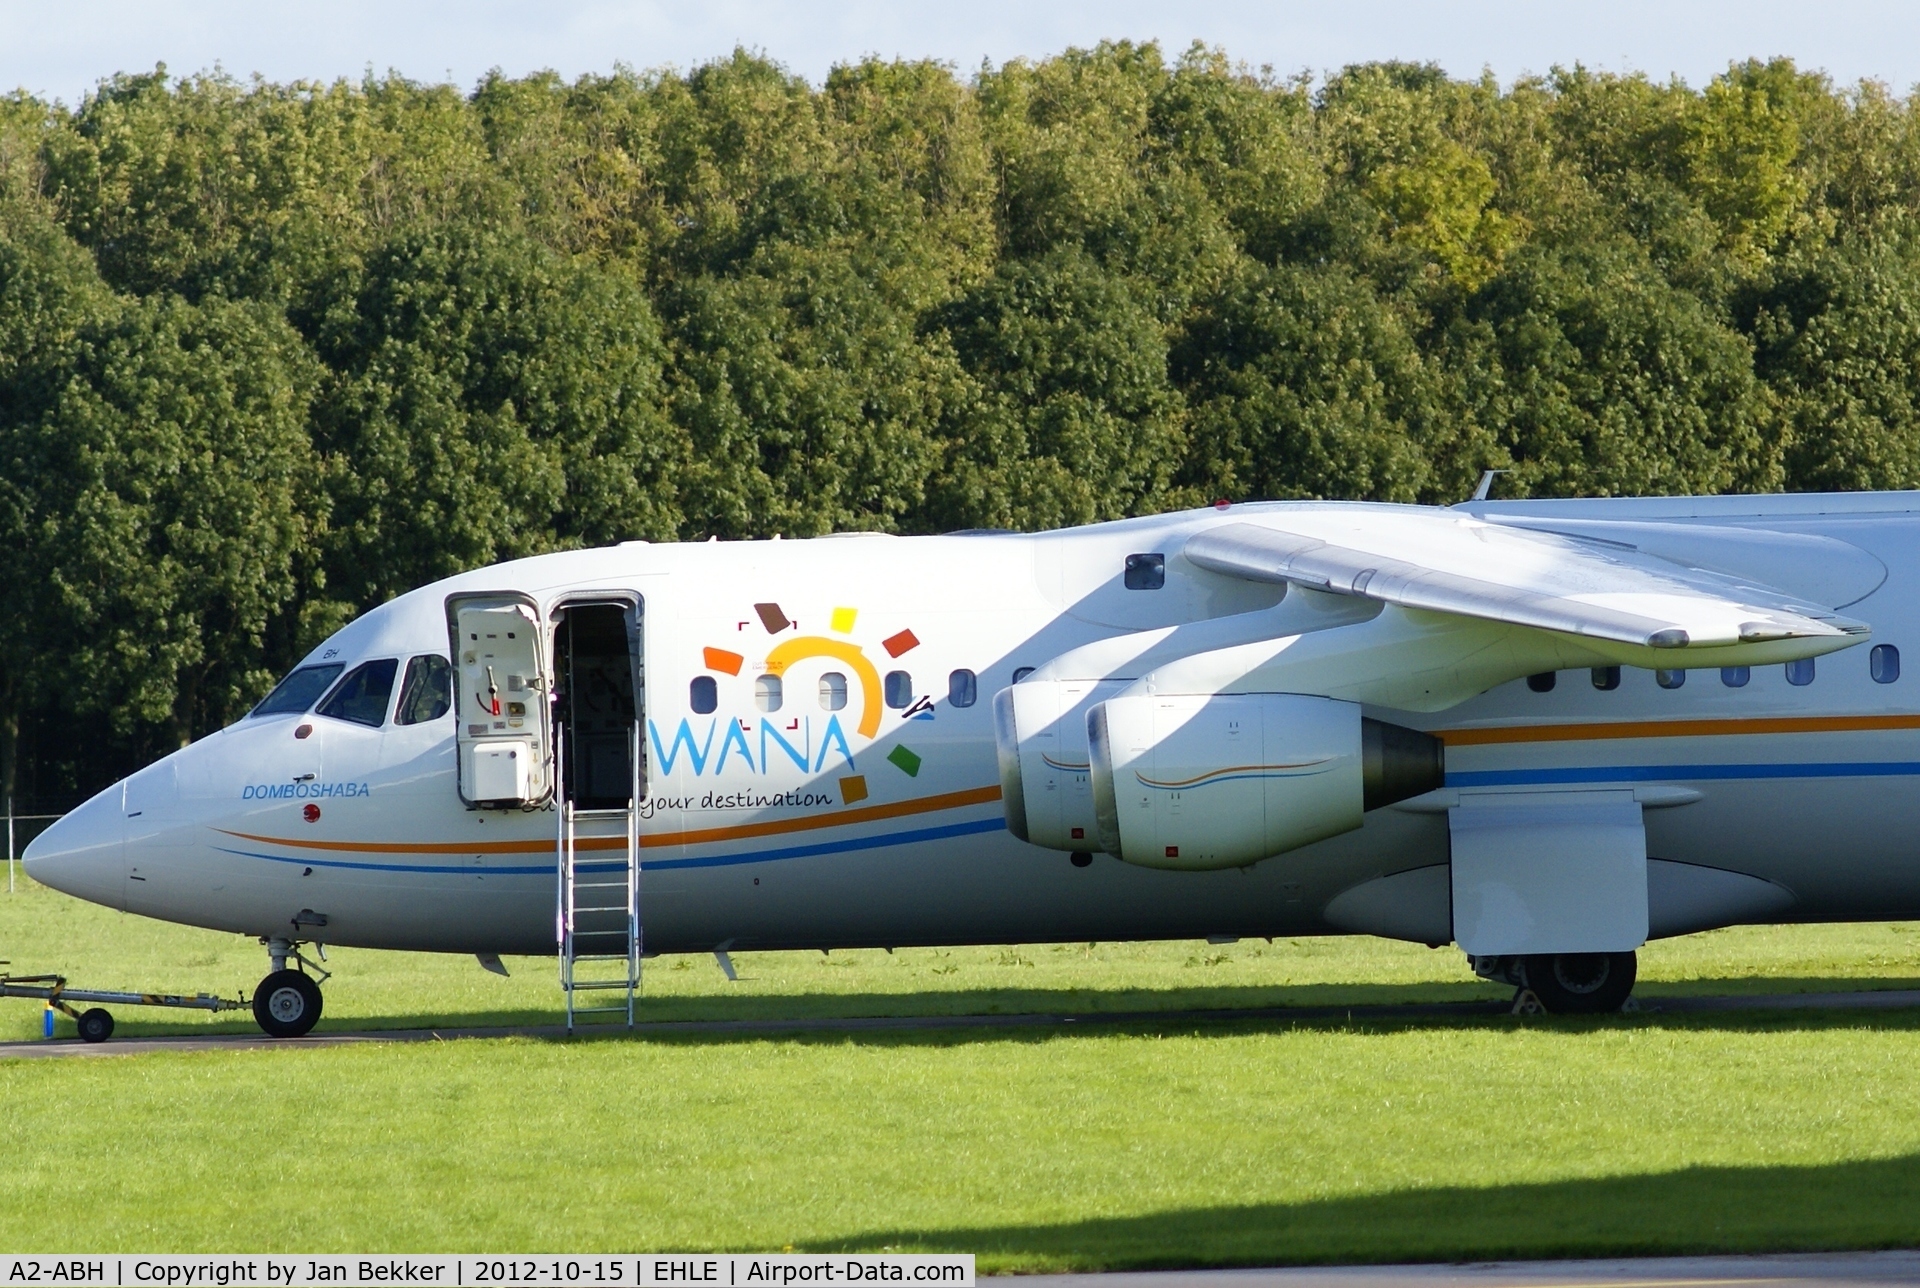 A2-ABH, 1997 British Aerospace Avro 146-RJ85 C/N E.2304, Just in its new livery. At the tail section the registration A2-ABH  is overtaped with the former registration D-AVRQ.